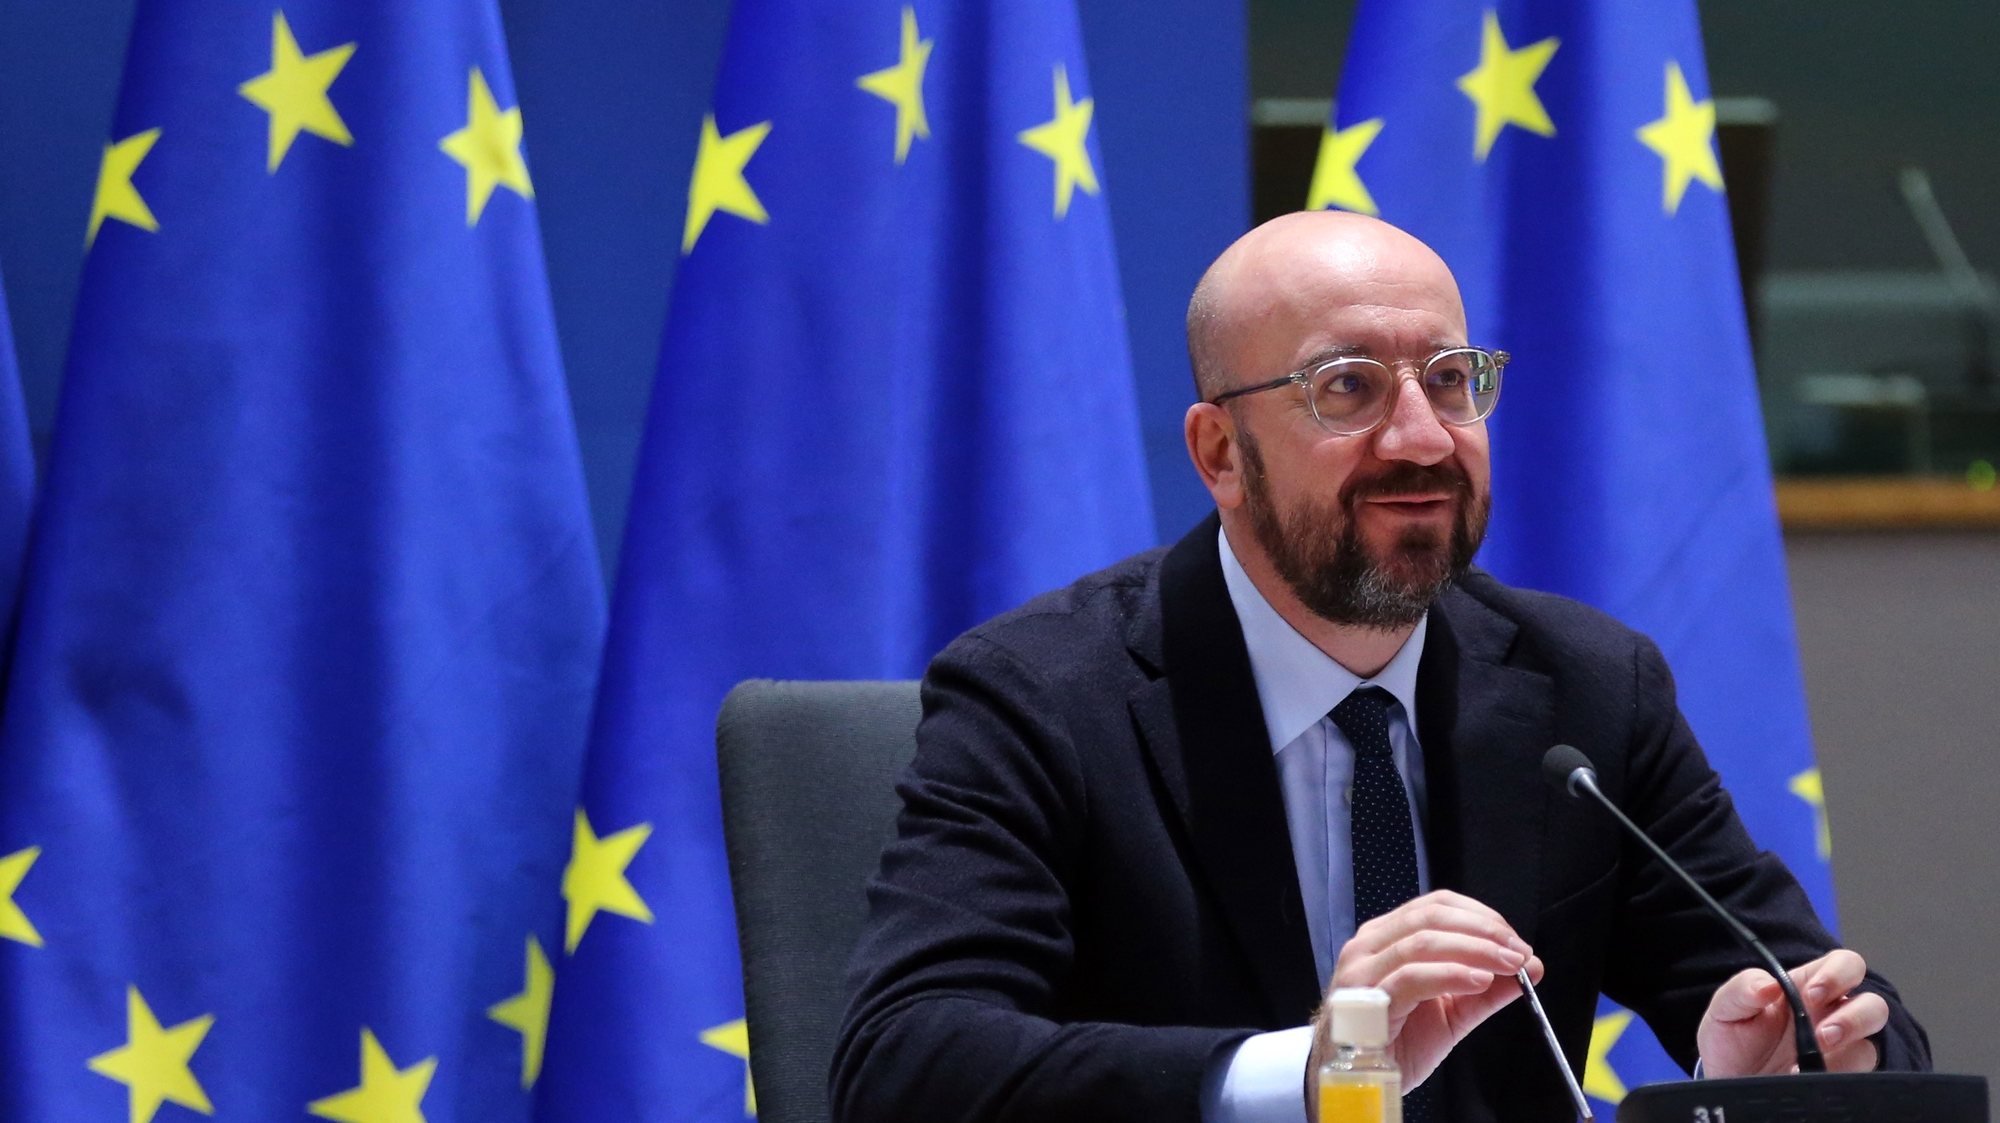 epa08858655 European Council President Charles Michel attends a video conference with representatives of EU member states ahead of the upcoming EU summit, in Brussels, Belgium, 03 December 2020. The summit will take place on 10 December 2020.  EPA/FRANCOIS WALSCHAERTS / POOL